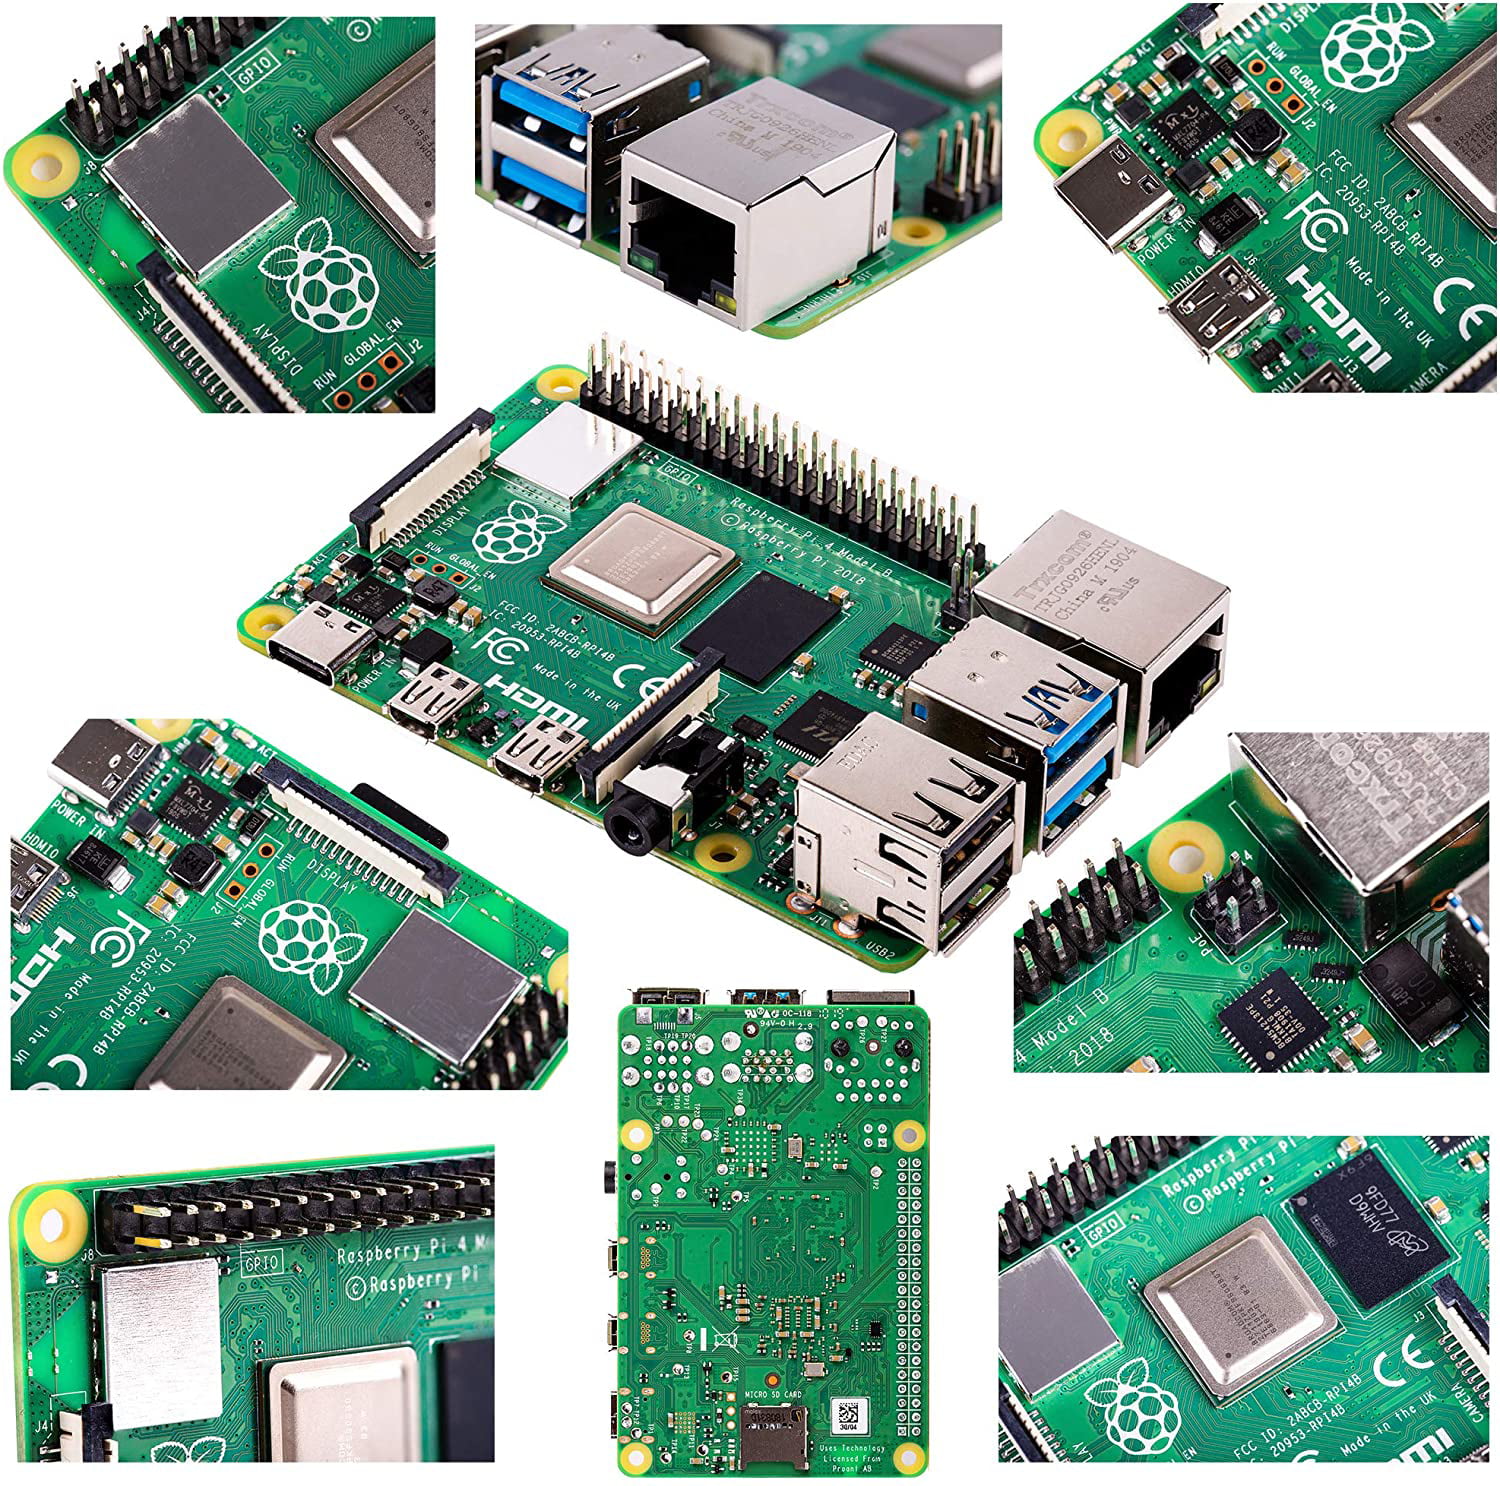 2GB RAM Vilros Raspberry PI 4 Model B Complete Desktop Kit with Mini Keyboard and Touchpad Combo